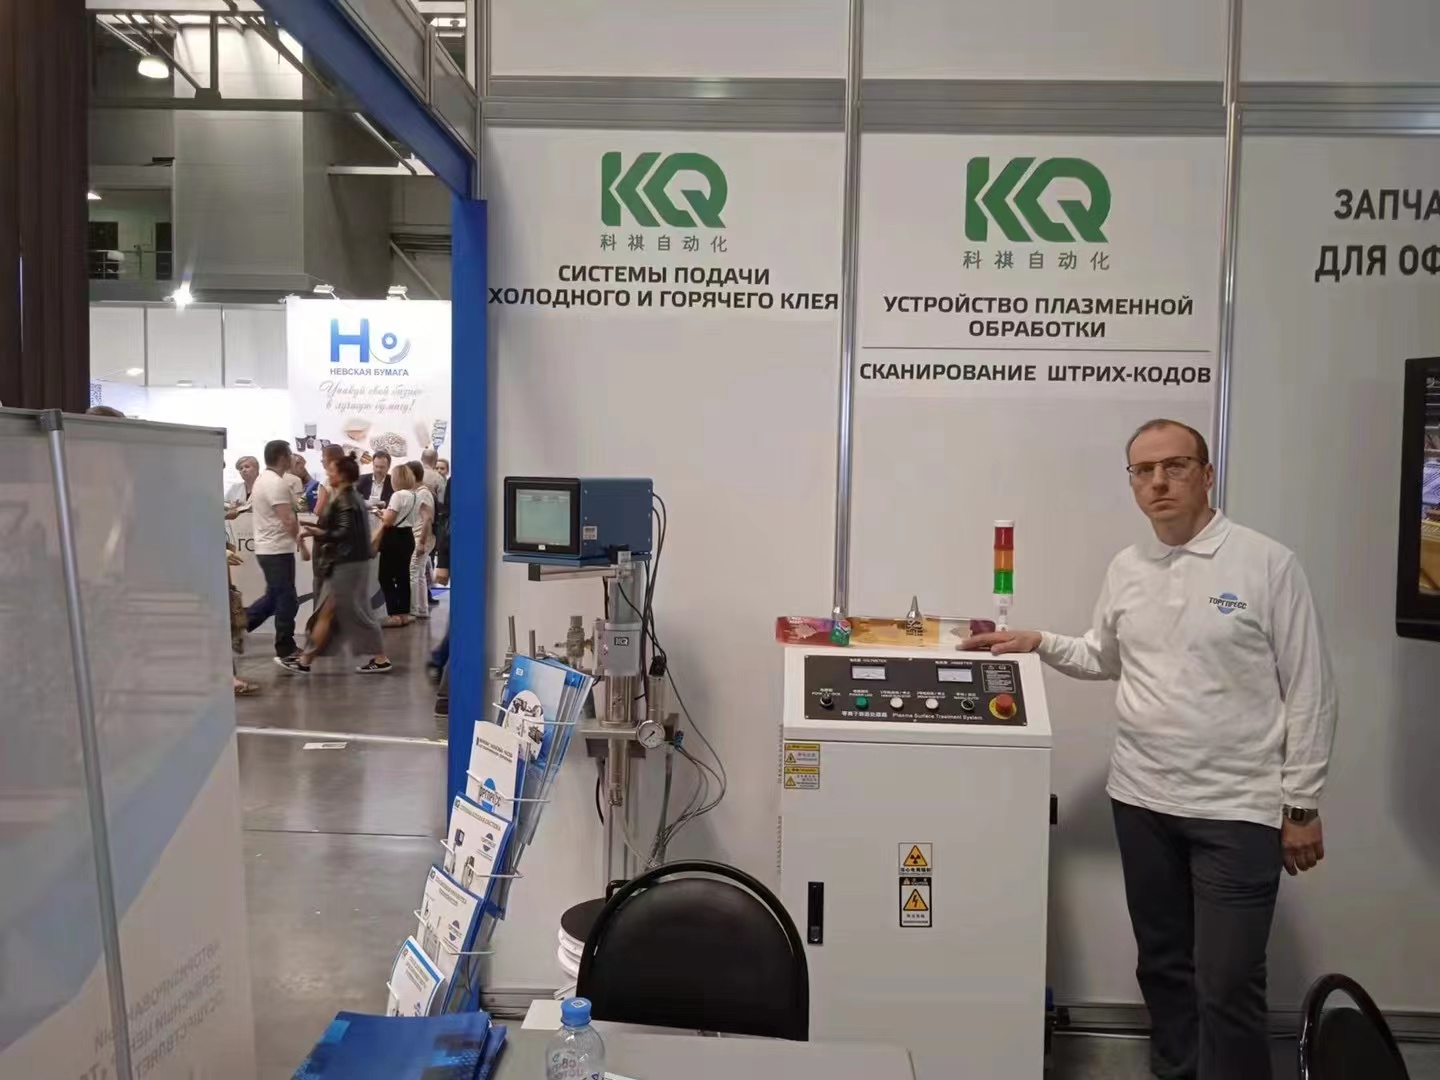 2022 Keqi Automation shines at exhibitions in Russia and India.